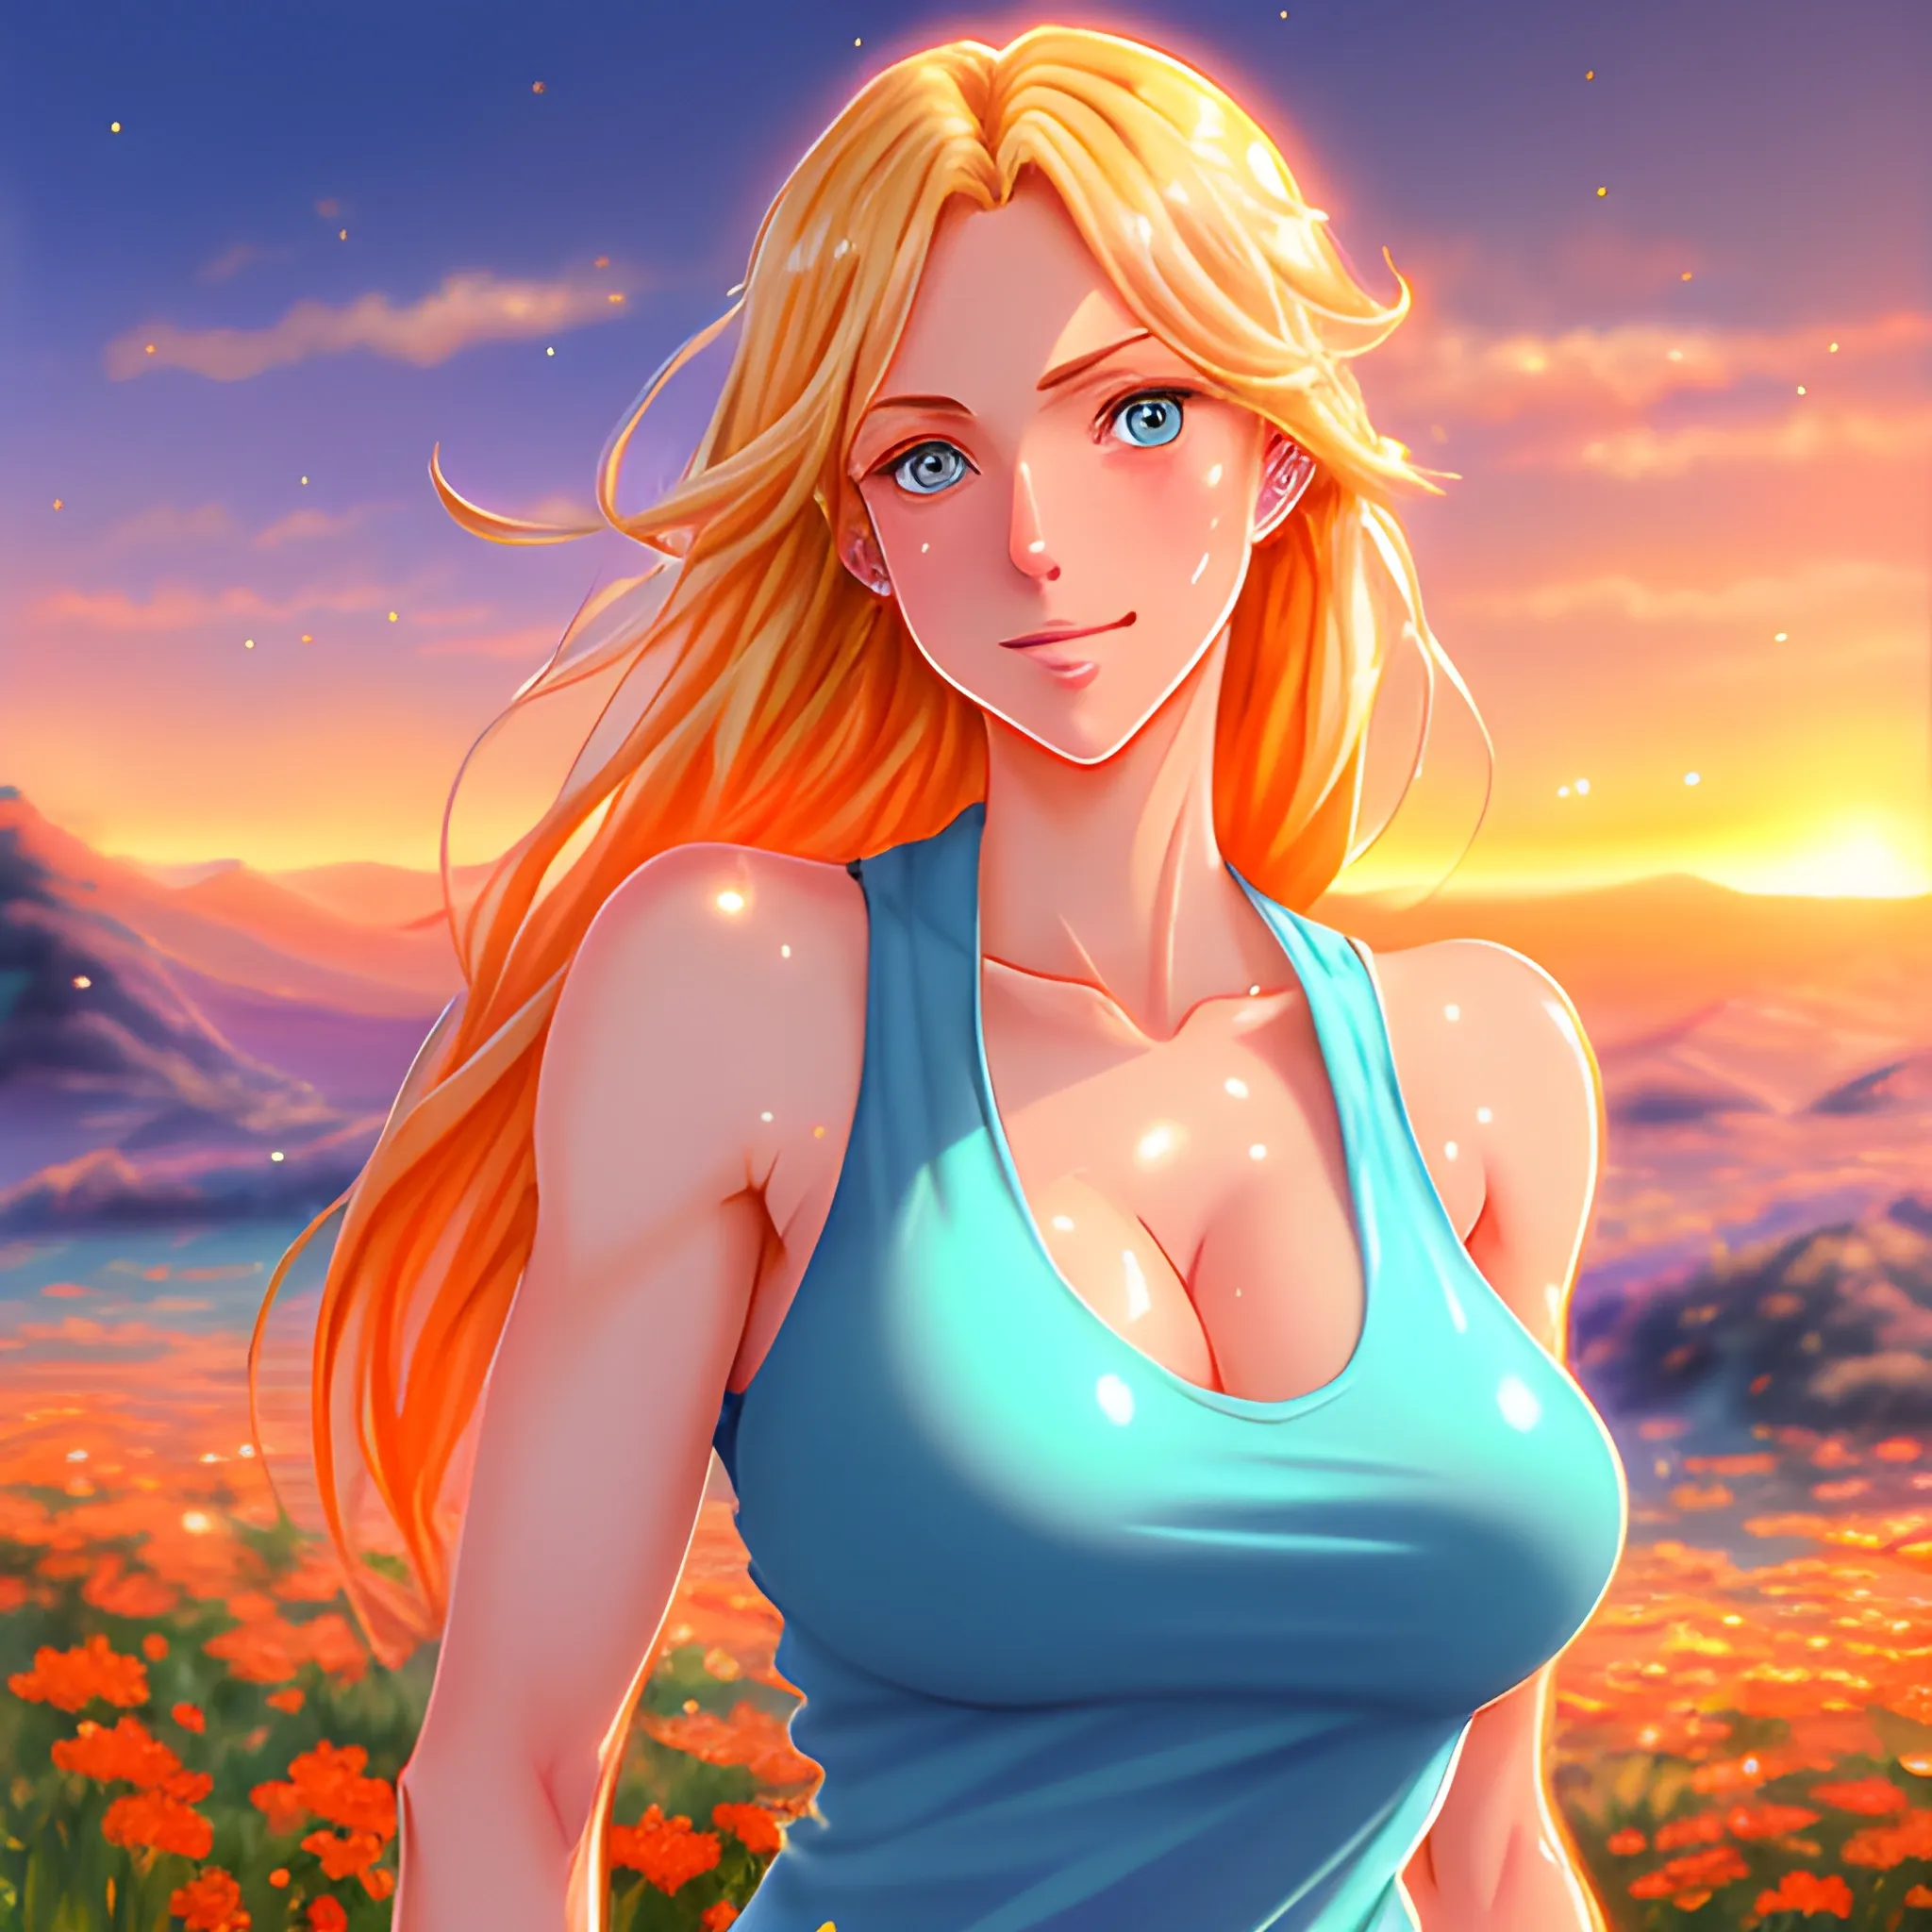 Anime art, cute young girl, shoulder-length blond hair in motion, rosy cheeks, tender face, big watery blue eyes, looks sad ,face, wearing a tank top, small chest, magical and luminous aura around herself, light cinematographic, volumetric light, highly detailed, magic fantasy orange sky in background with sunset and stars, digital painting, size: 3048x3048